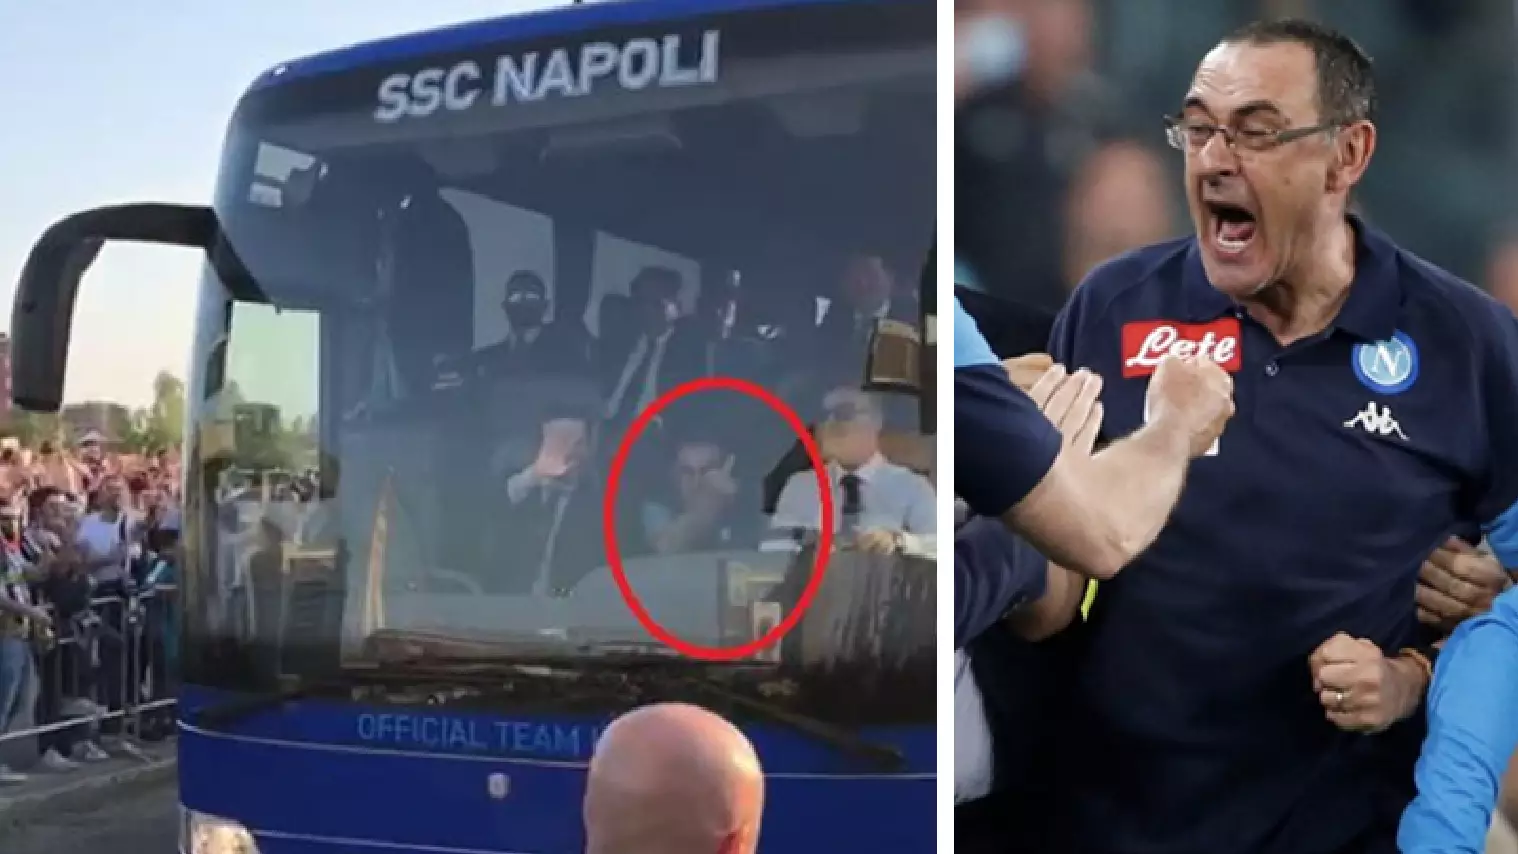 Napoil Boss Gives Juventus Supporters Middle Finger Ahead Of Clash